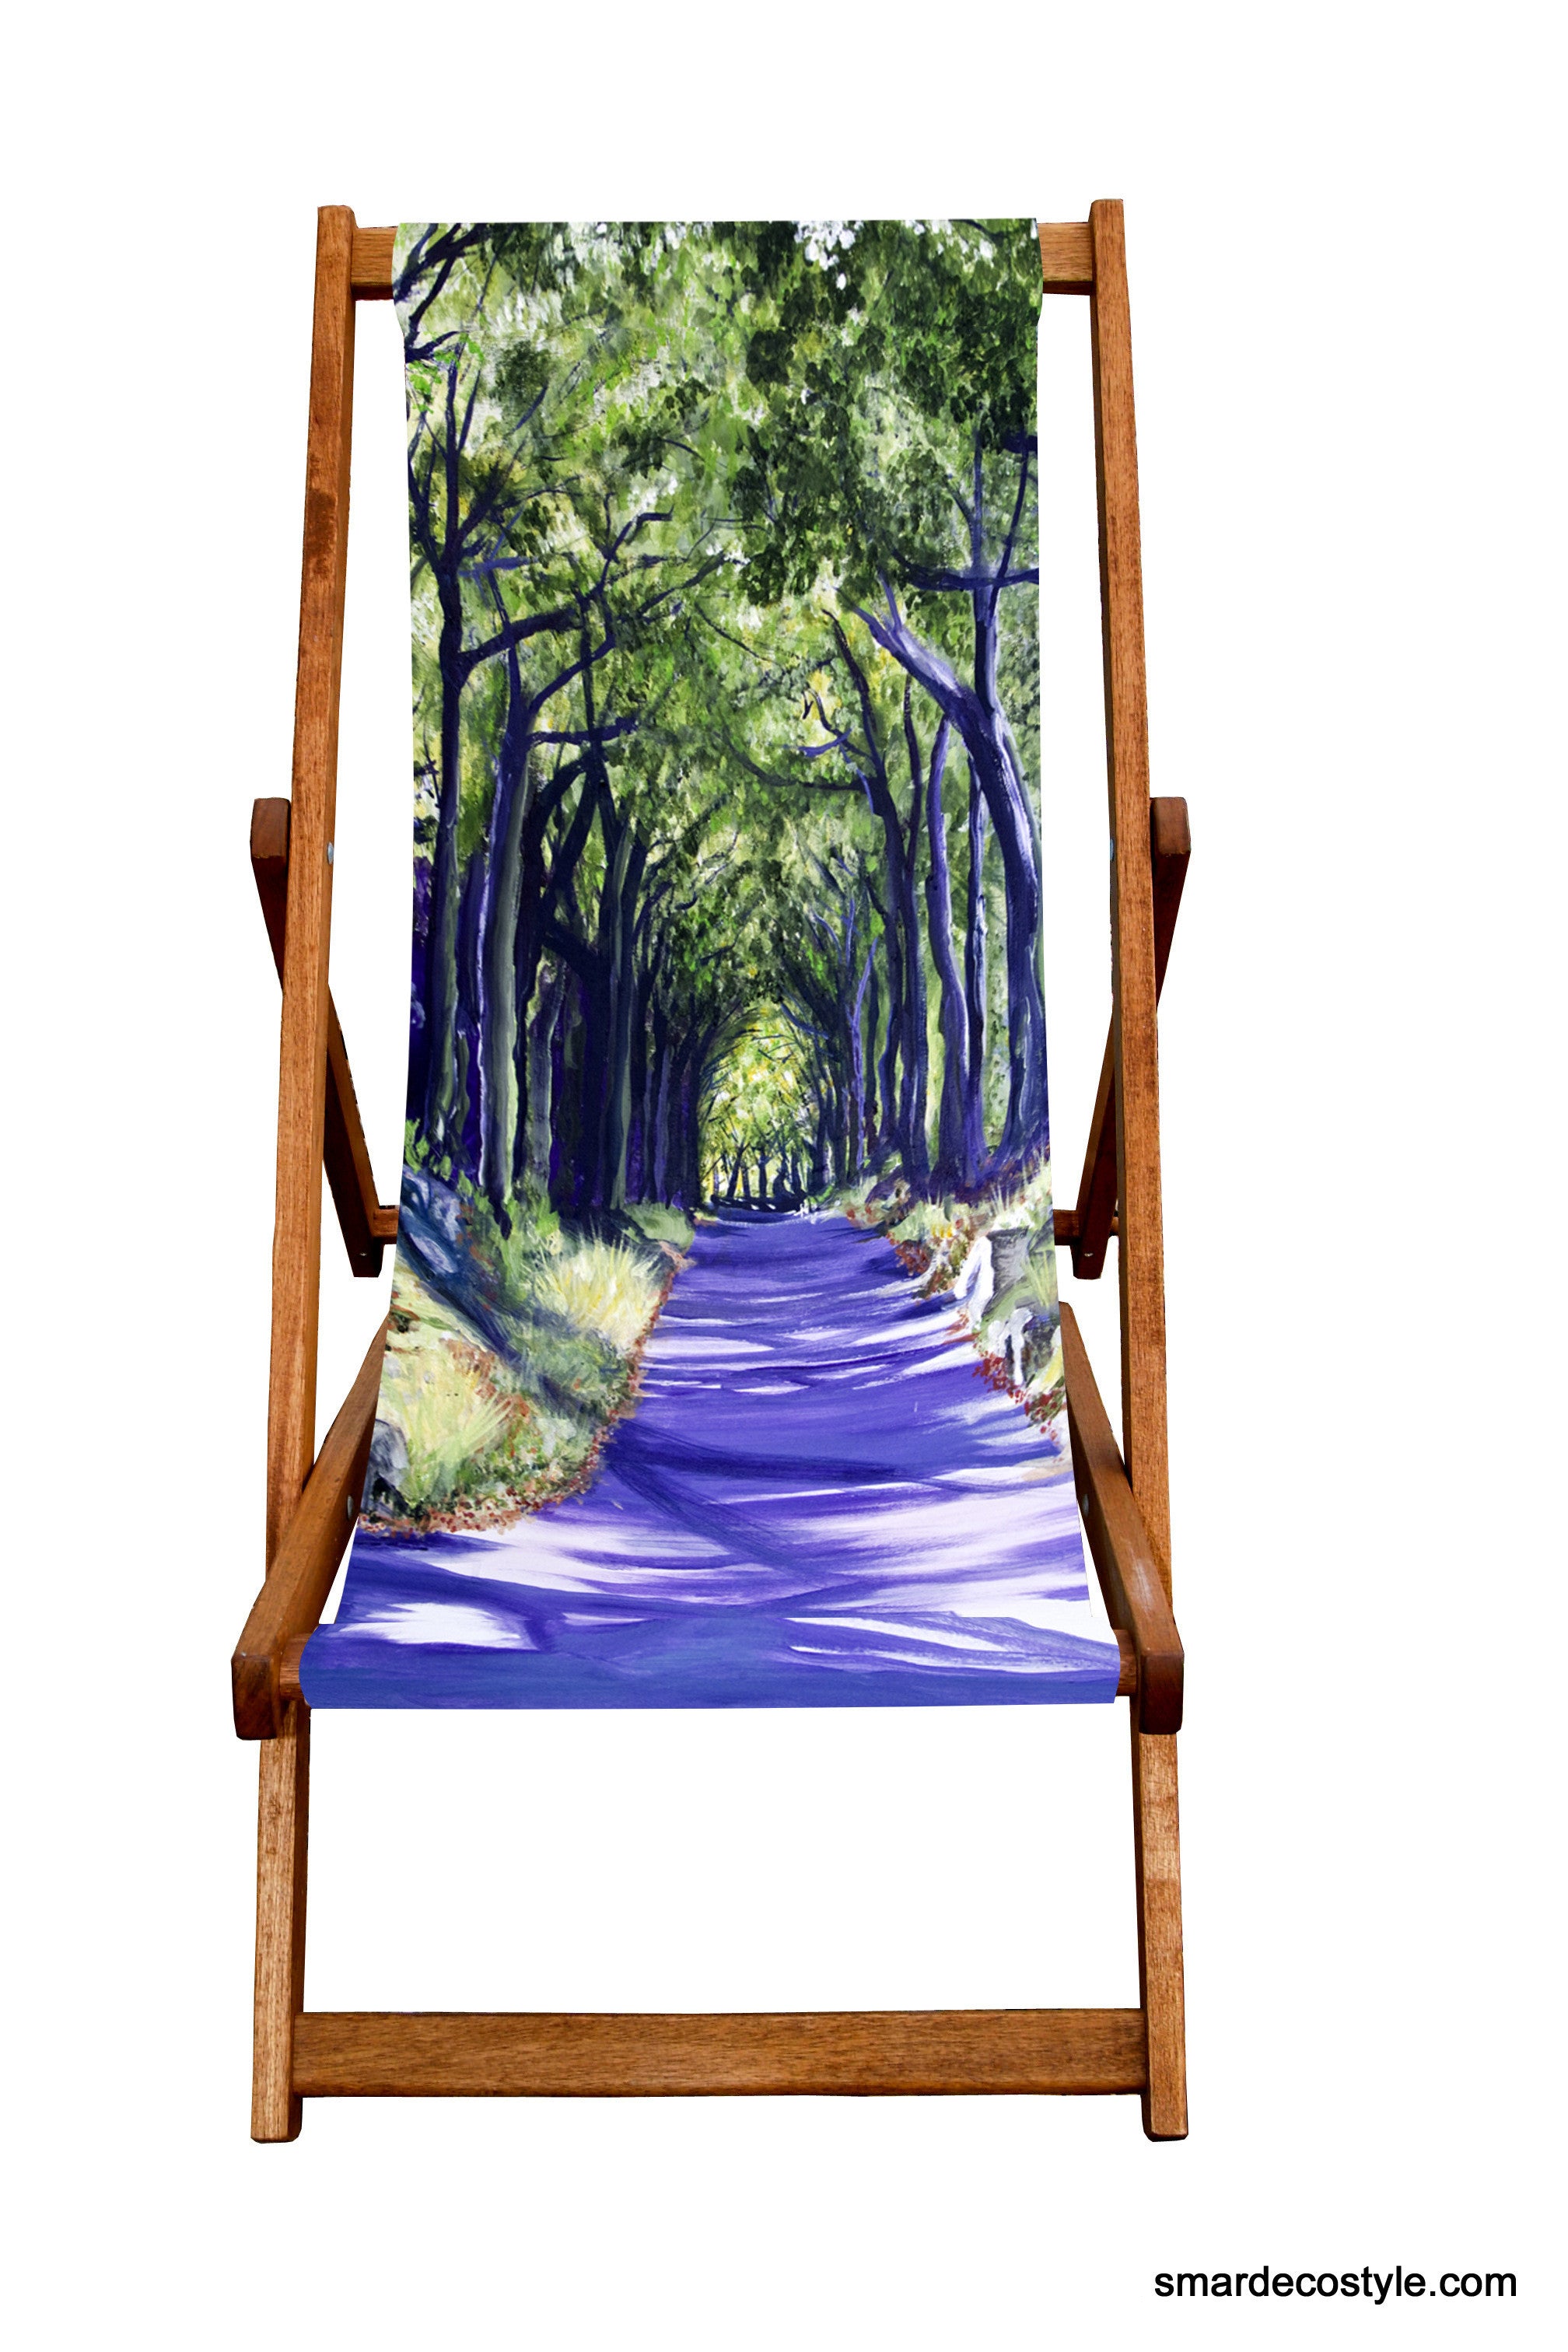 Deckchair - Traditional Seaside  - Country Lane  Smart Deco Homeware Lighting and Art by Jacqueline hammond